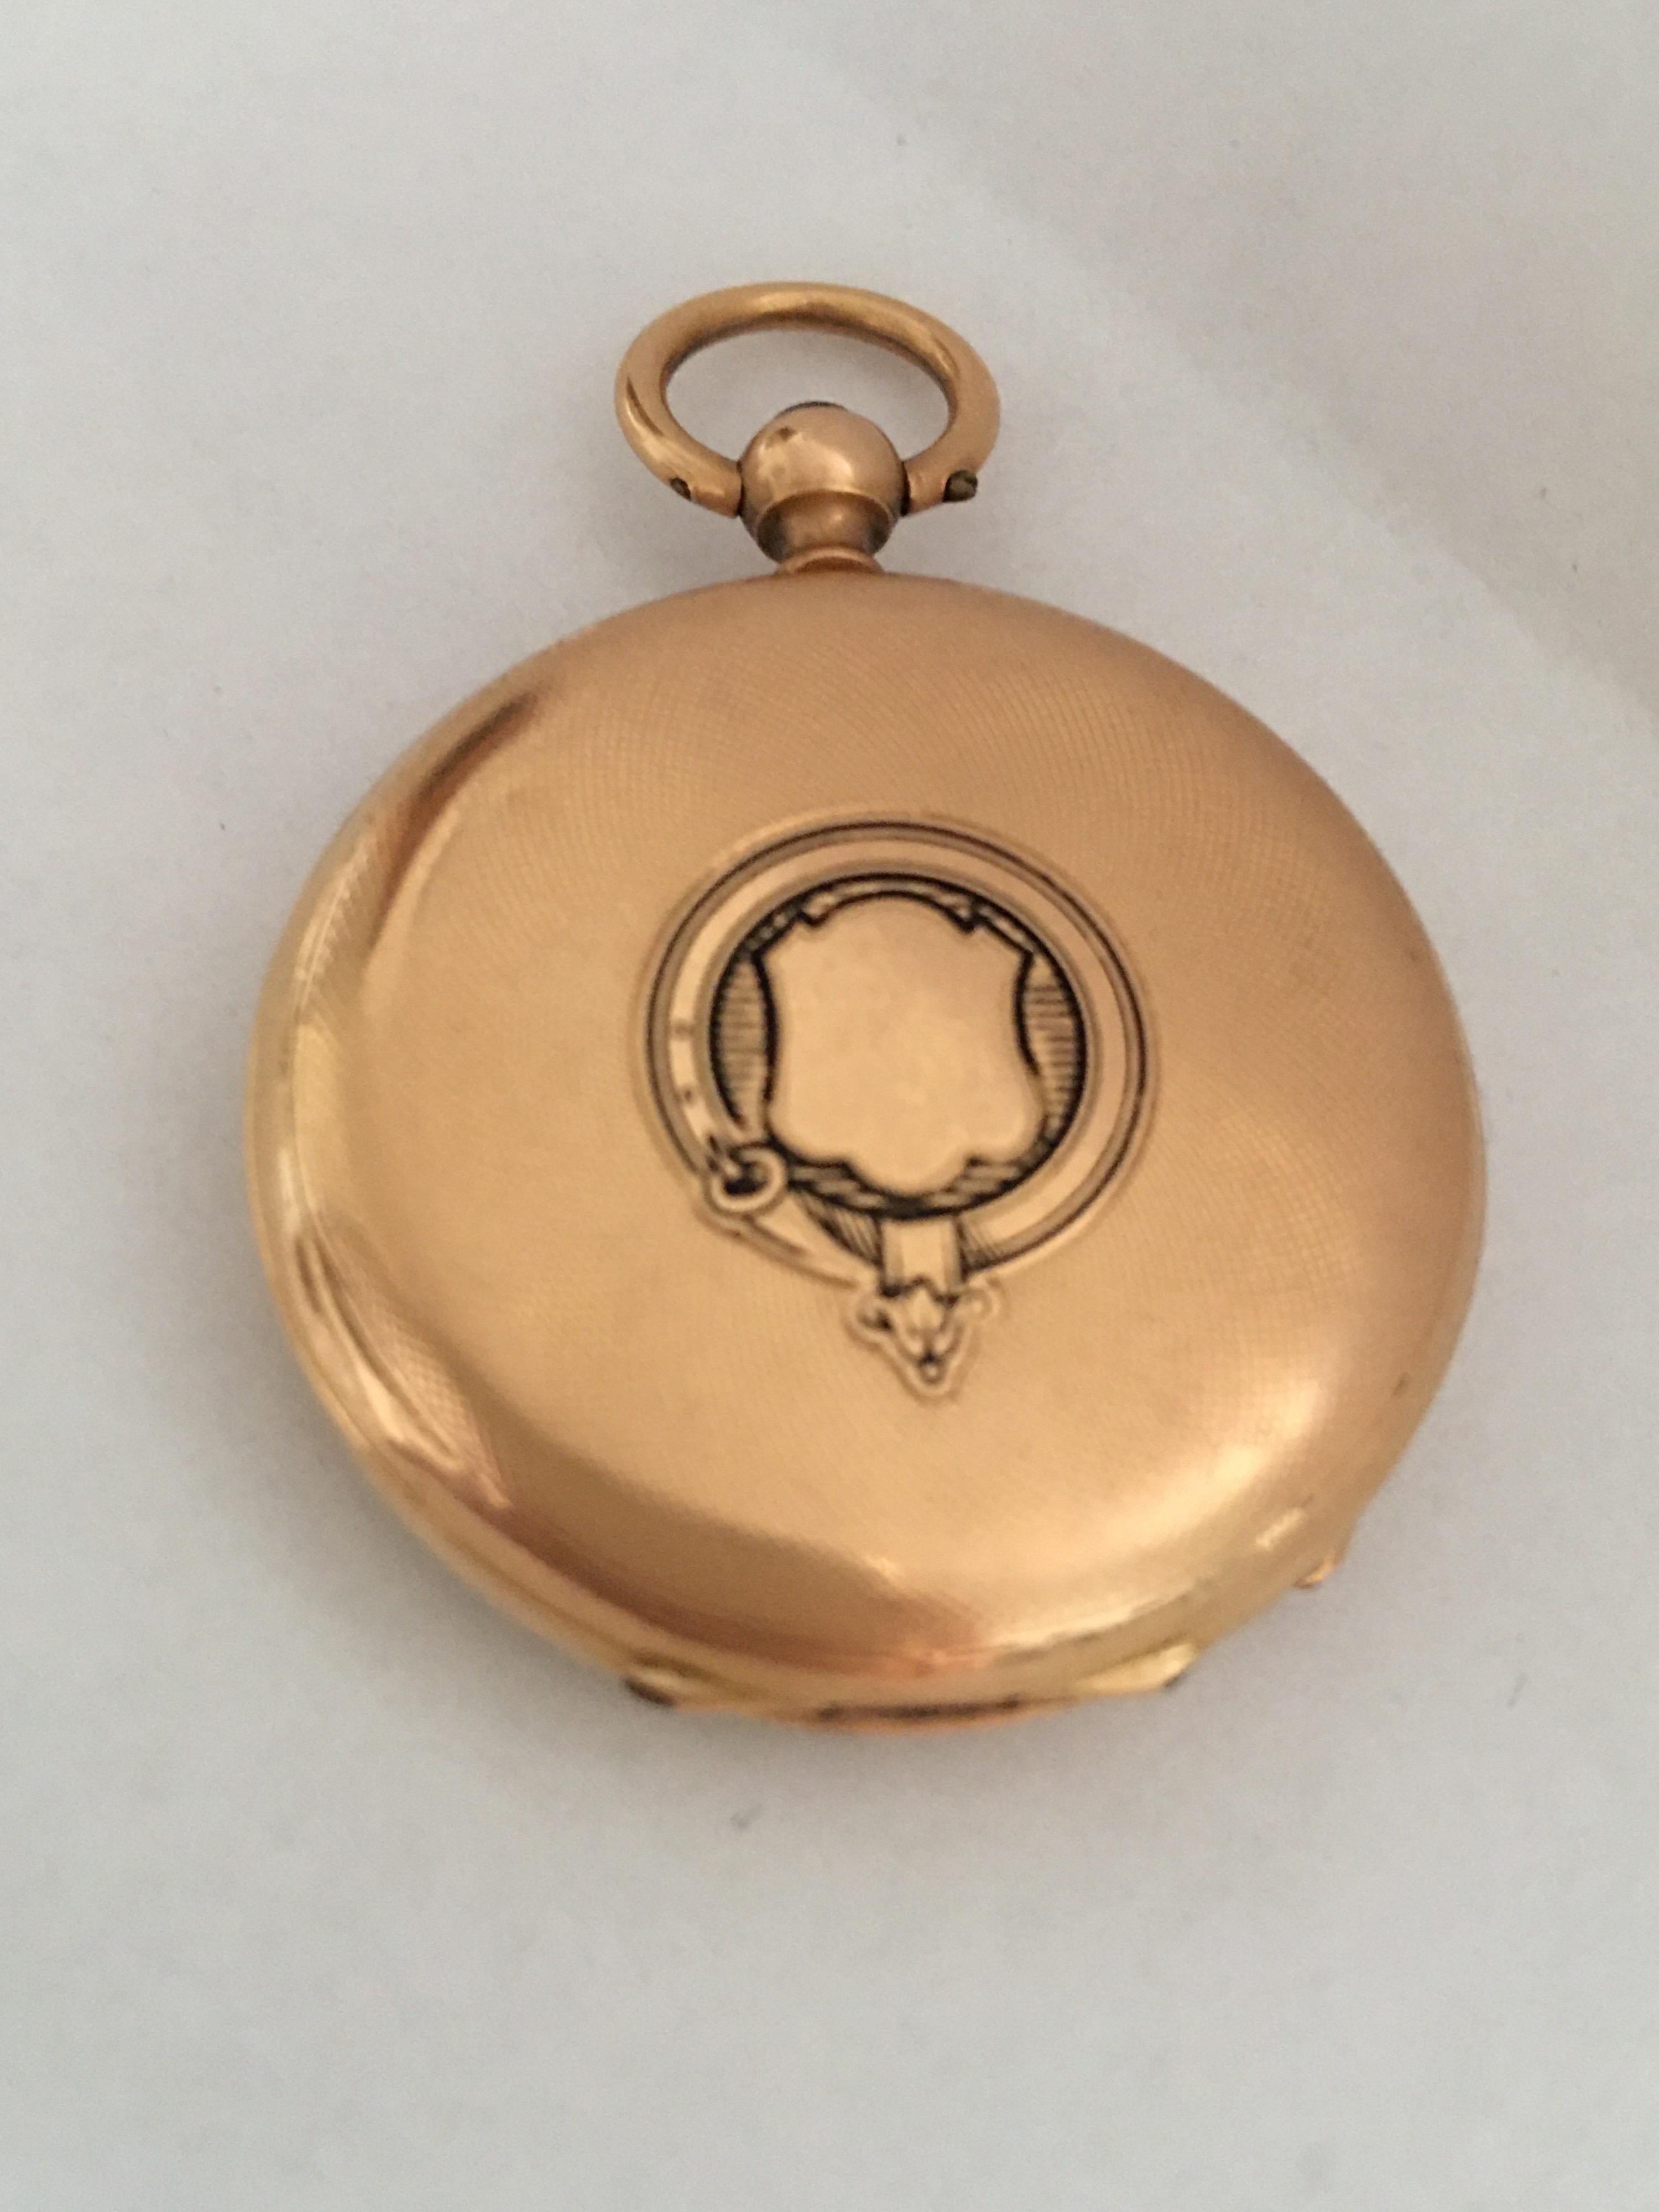 This beautiful antique ladies fob watch is working and it is ticking well. Visible dents on the back case as shown. It comes with a key

Please study the images carefully as form part of the description 